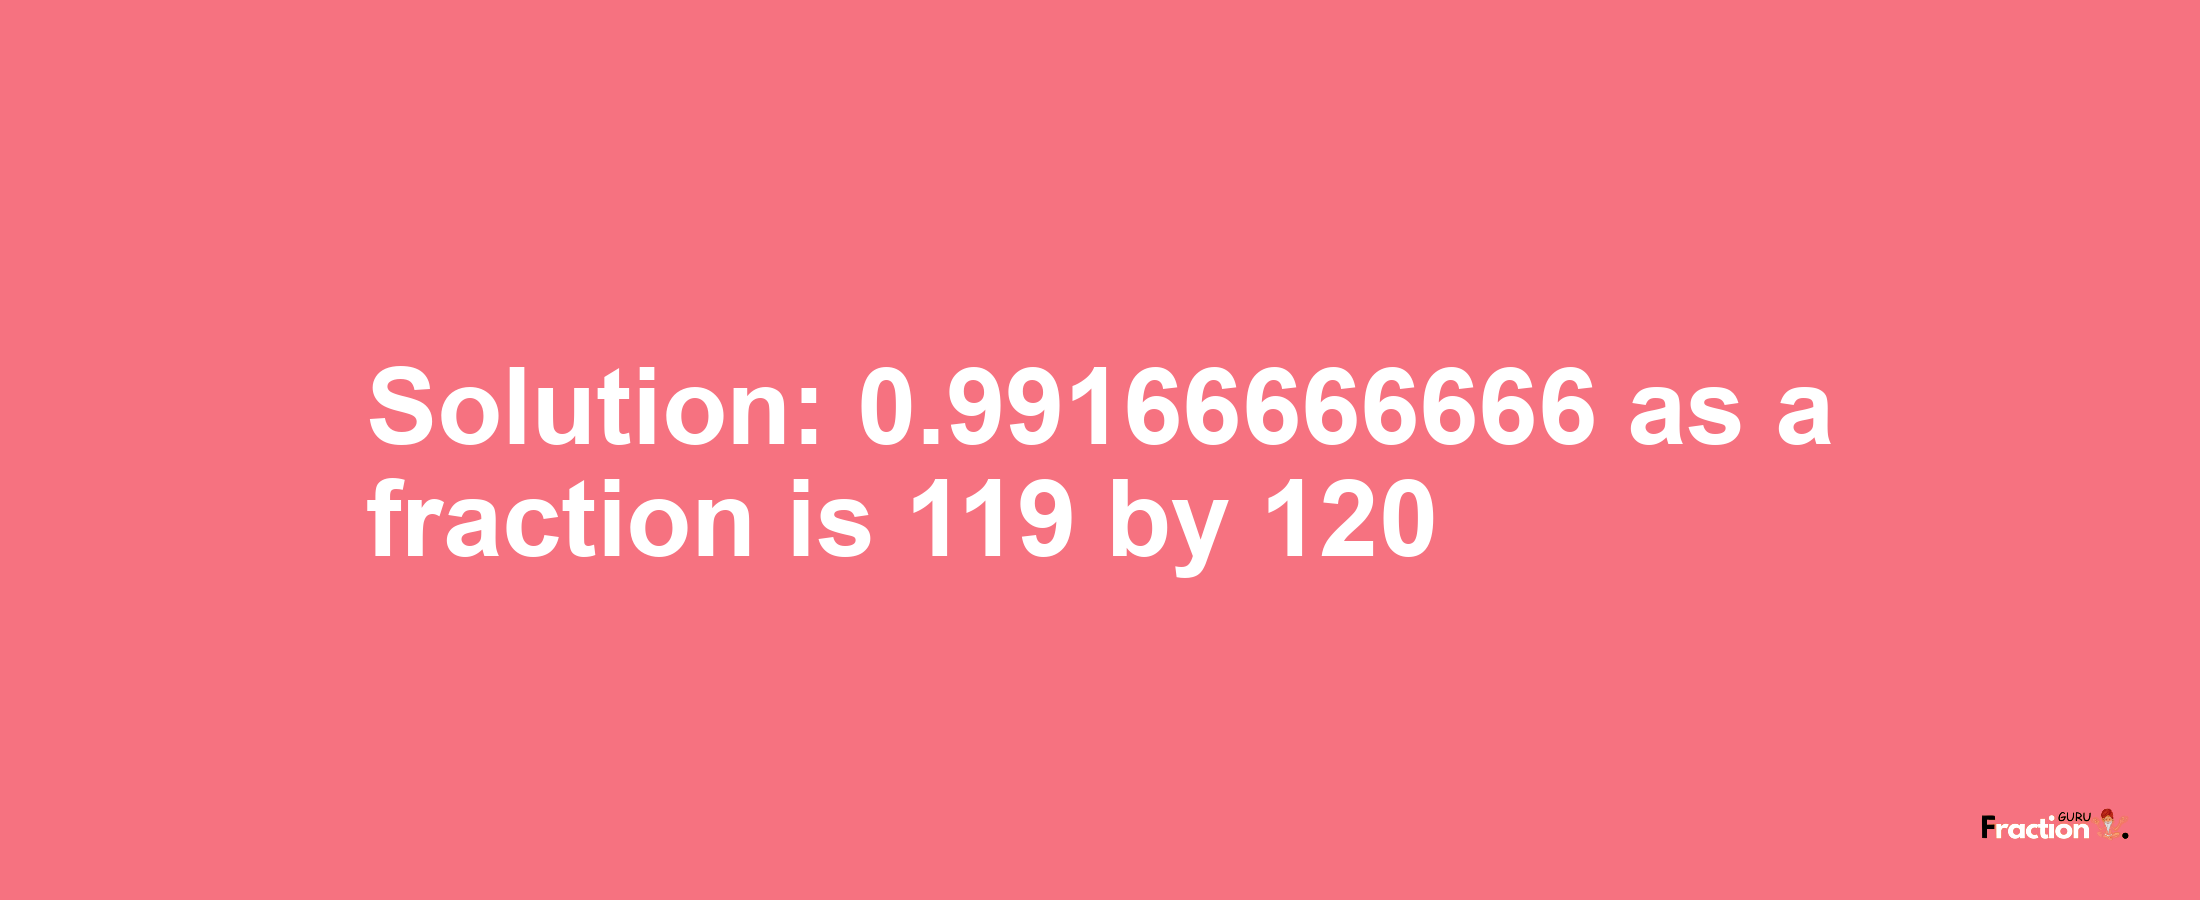 Solution:0.99166666666 as a fraction is 119/120